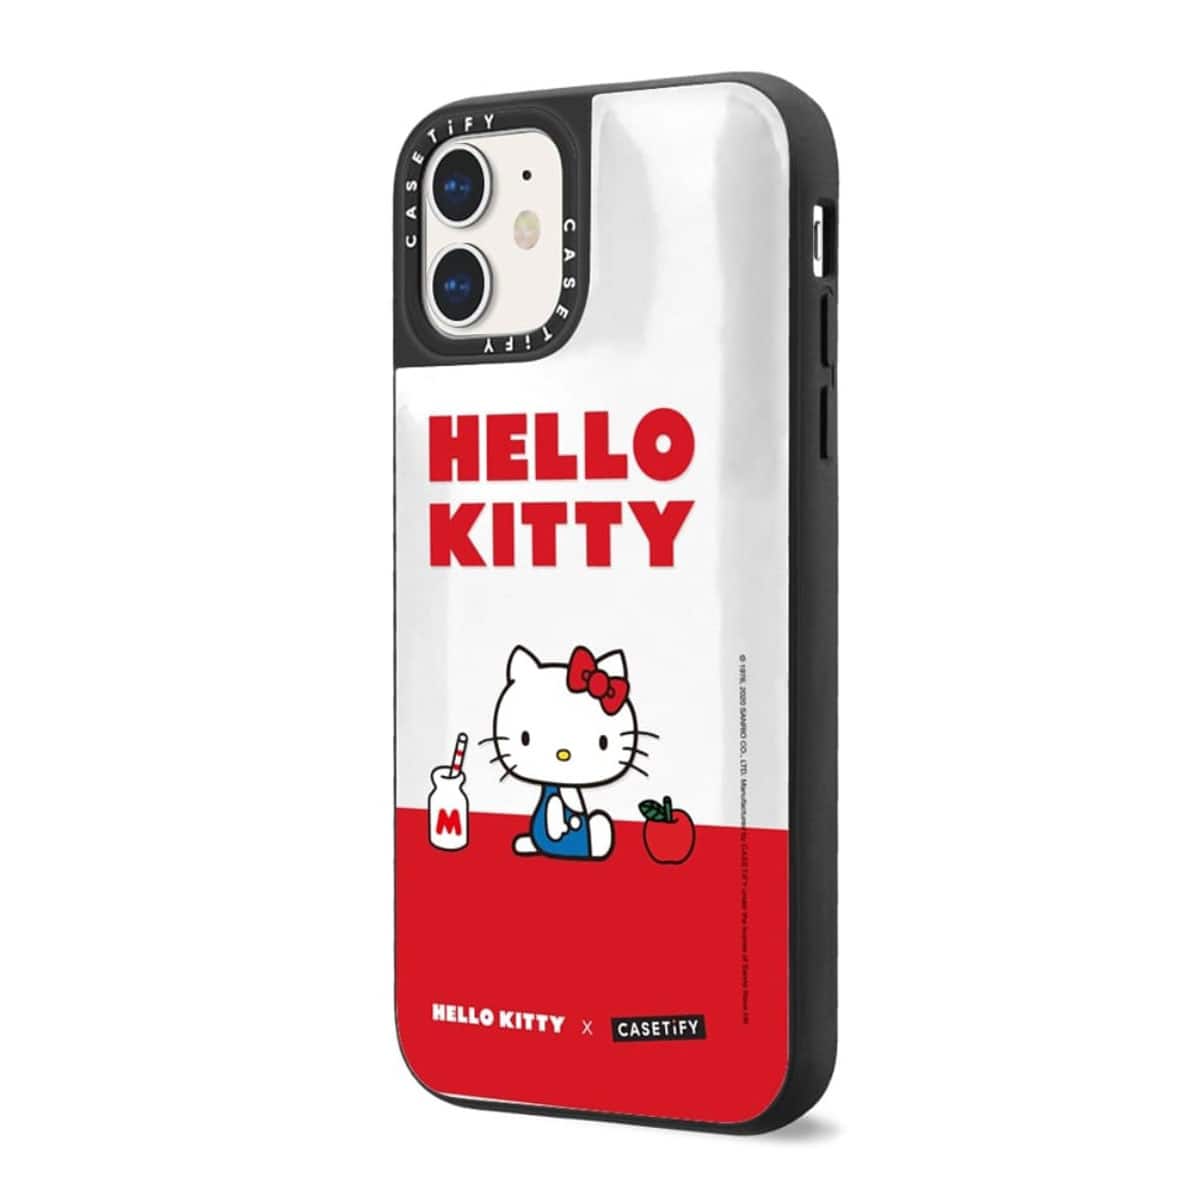 CASETIFY Puffy Case - Color Block (iPhone 11)